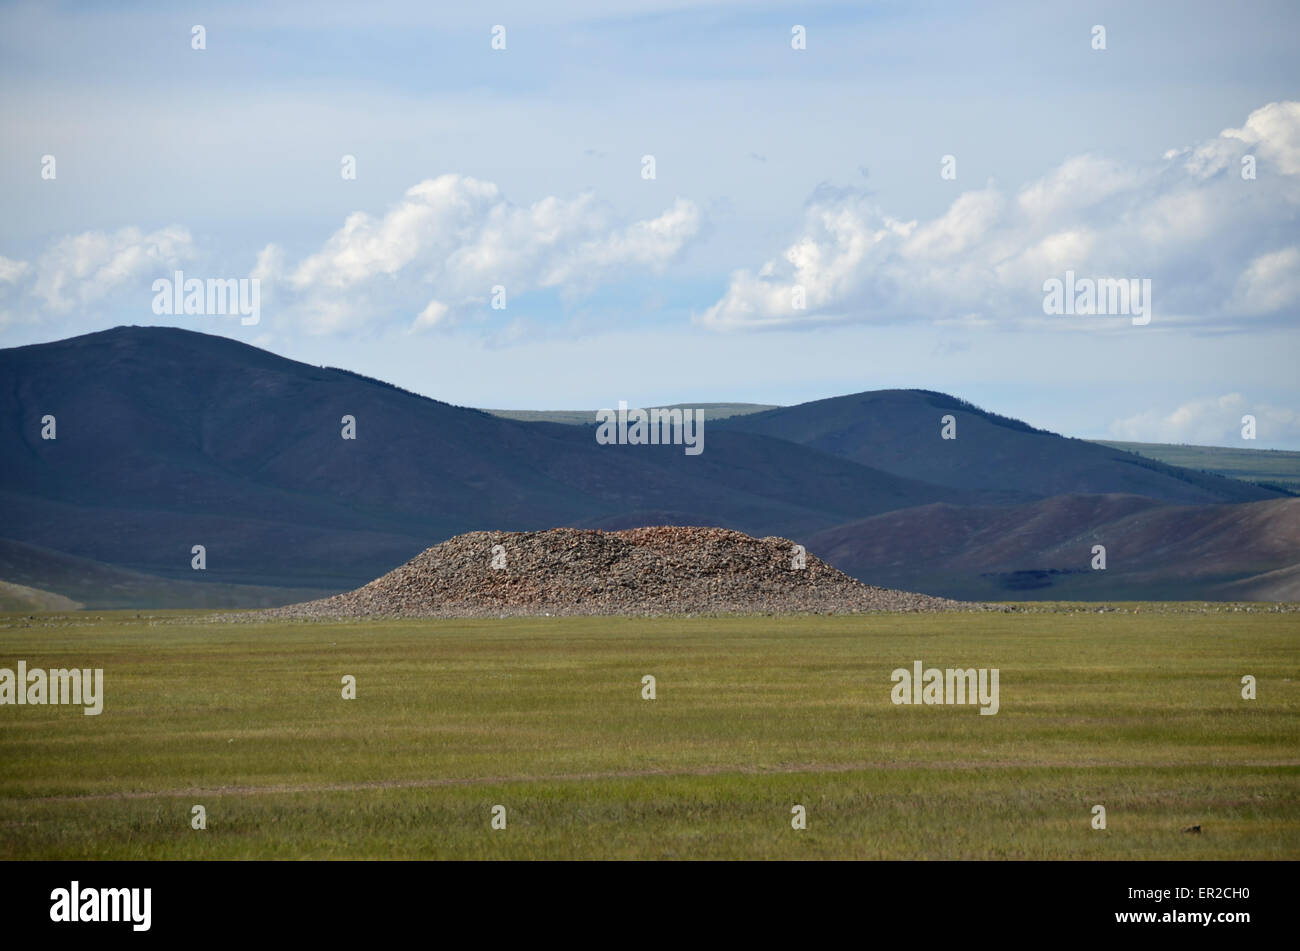 A burial mound in the Arhangay province, central Mongolia. This kind of monument is also called kurgan. Stock Photo